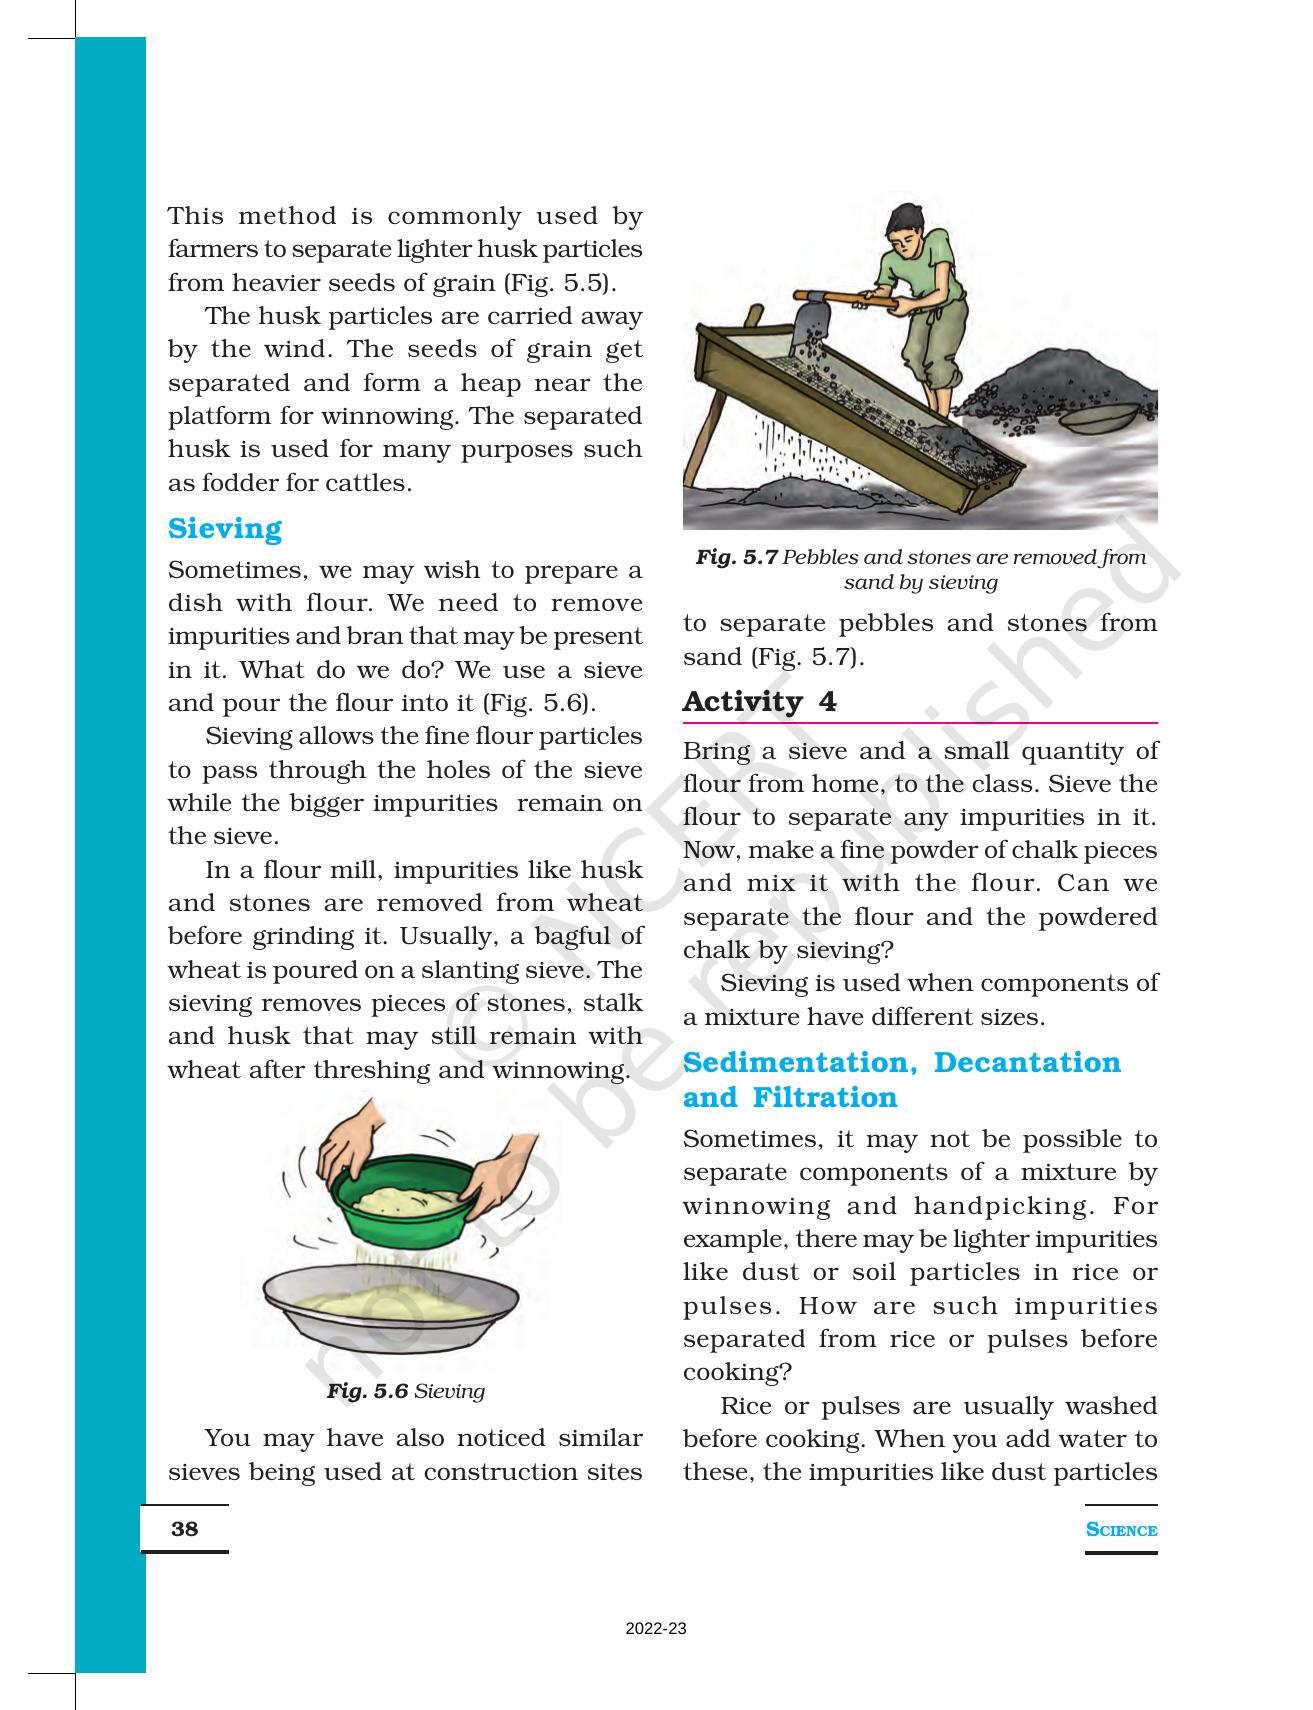 NCERT Book for Class 6 Science: Chapter 5-Separation of Substances - Page 4